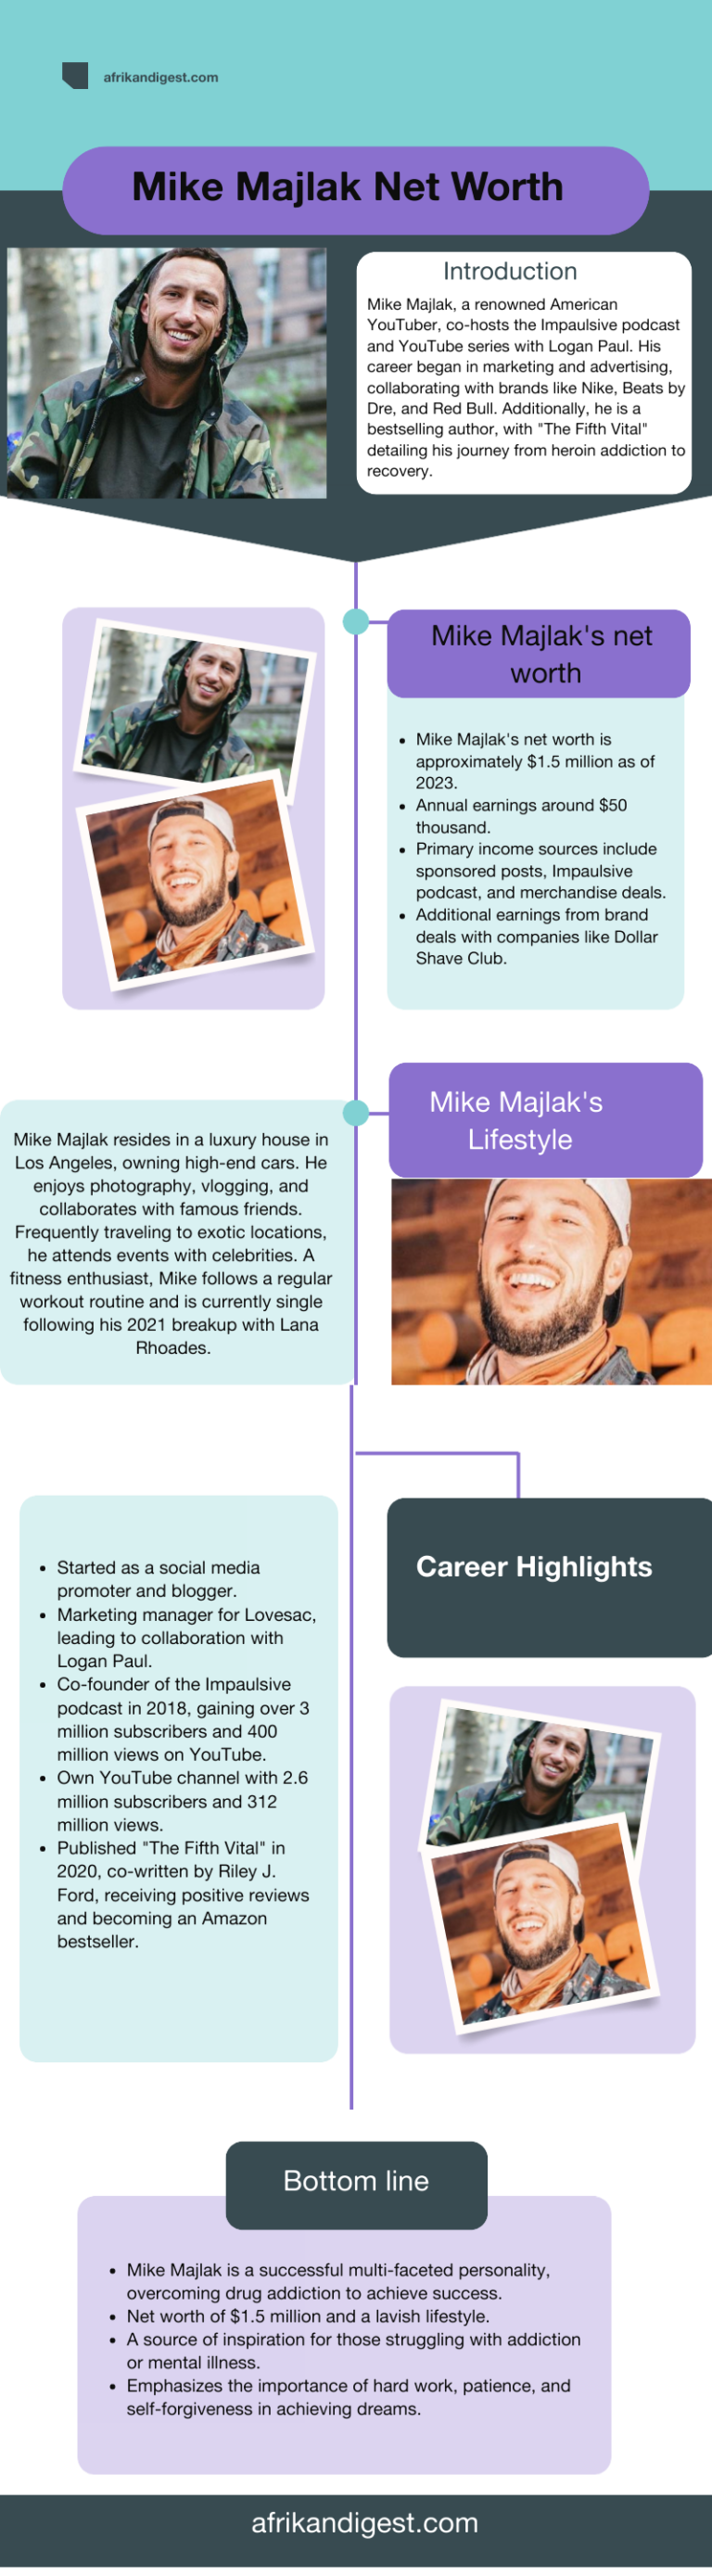 Infographic illustrating how Mike Majlak makes money